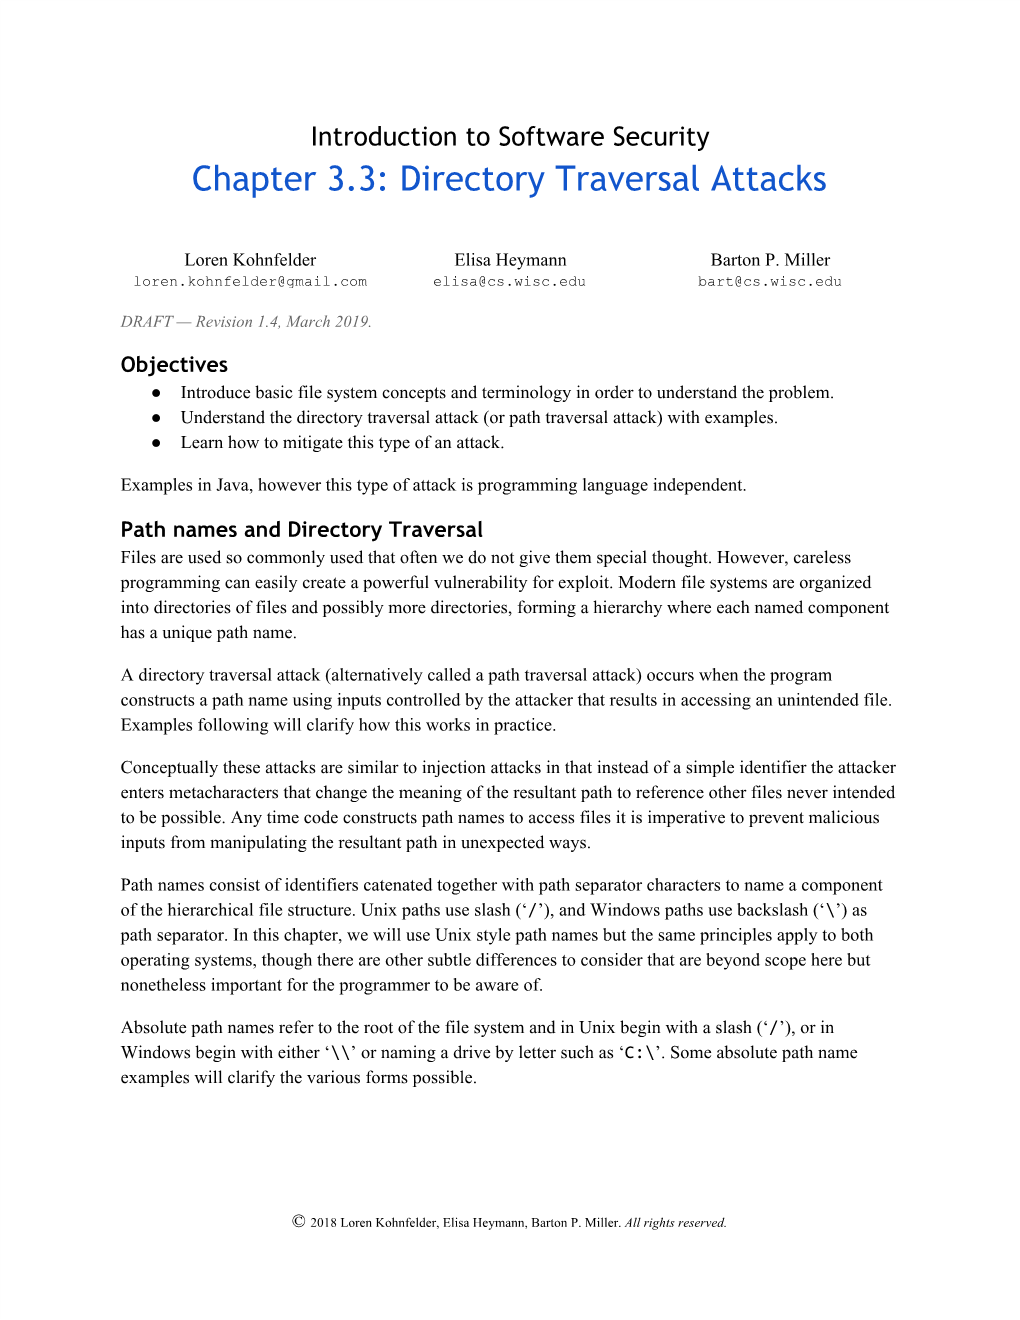 Chapter 3.3: Directory Traversal Attacks